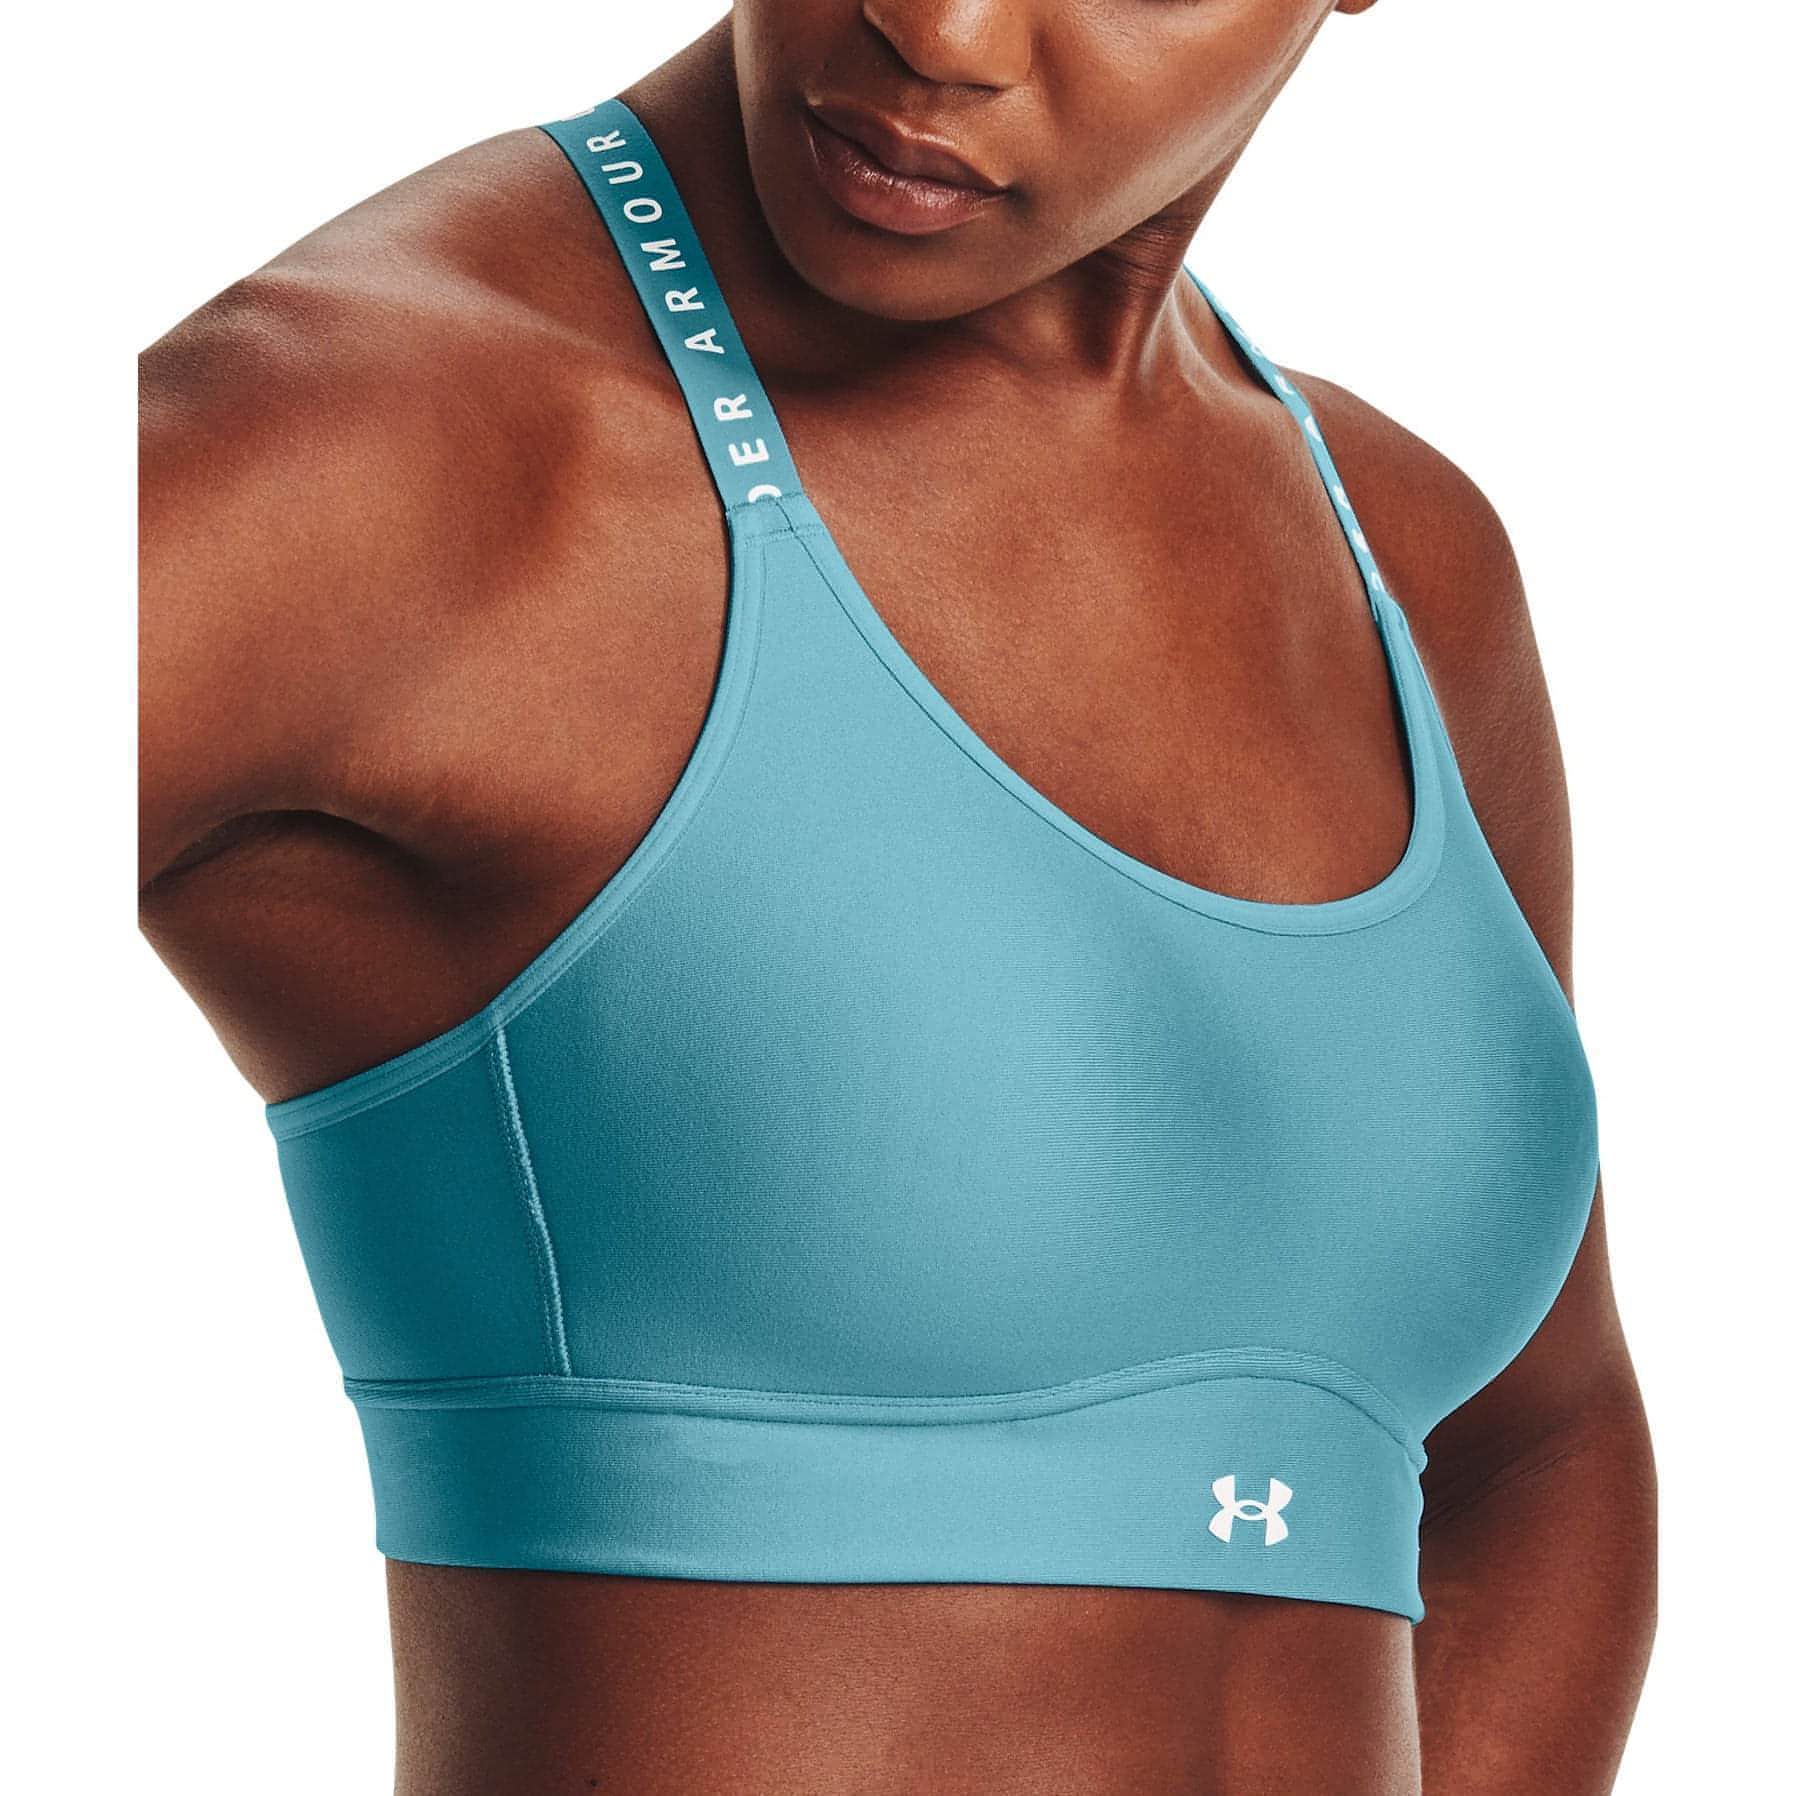 Under Armour Infinity Mid Covered Womens Sports Bra - Blue